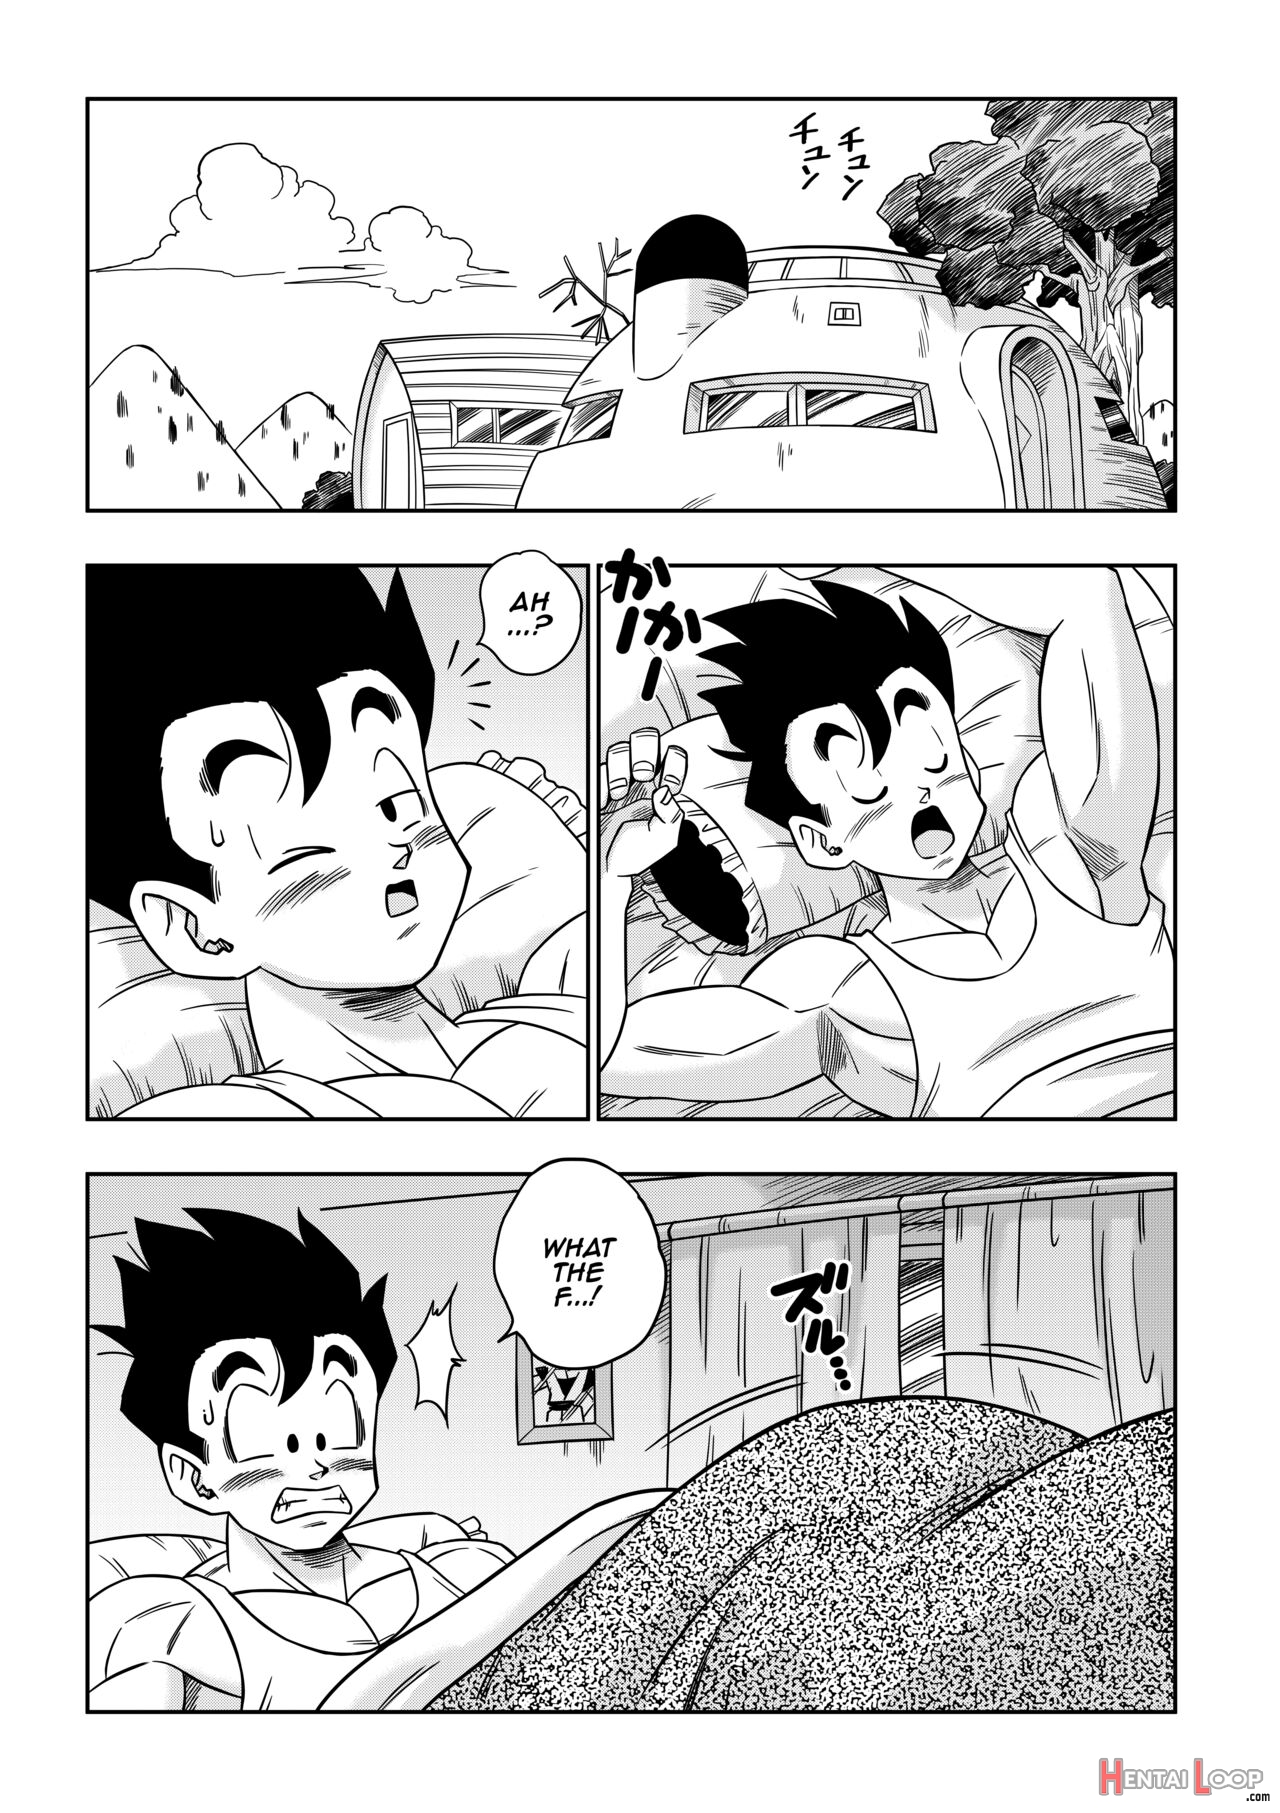 Love Triangle Z Part 5 page 3